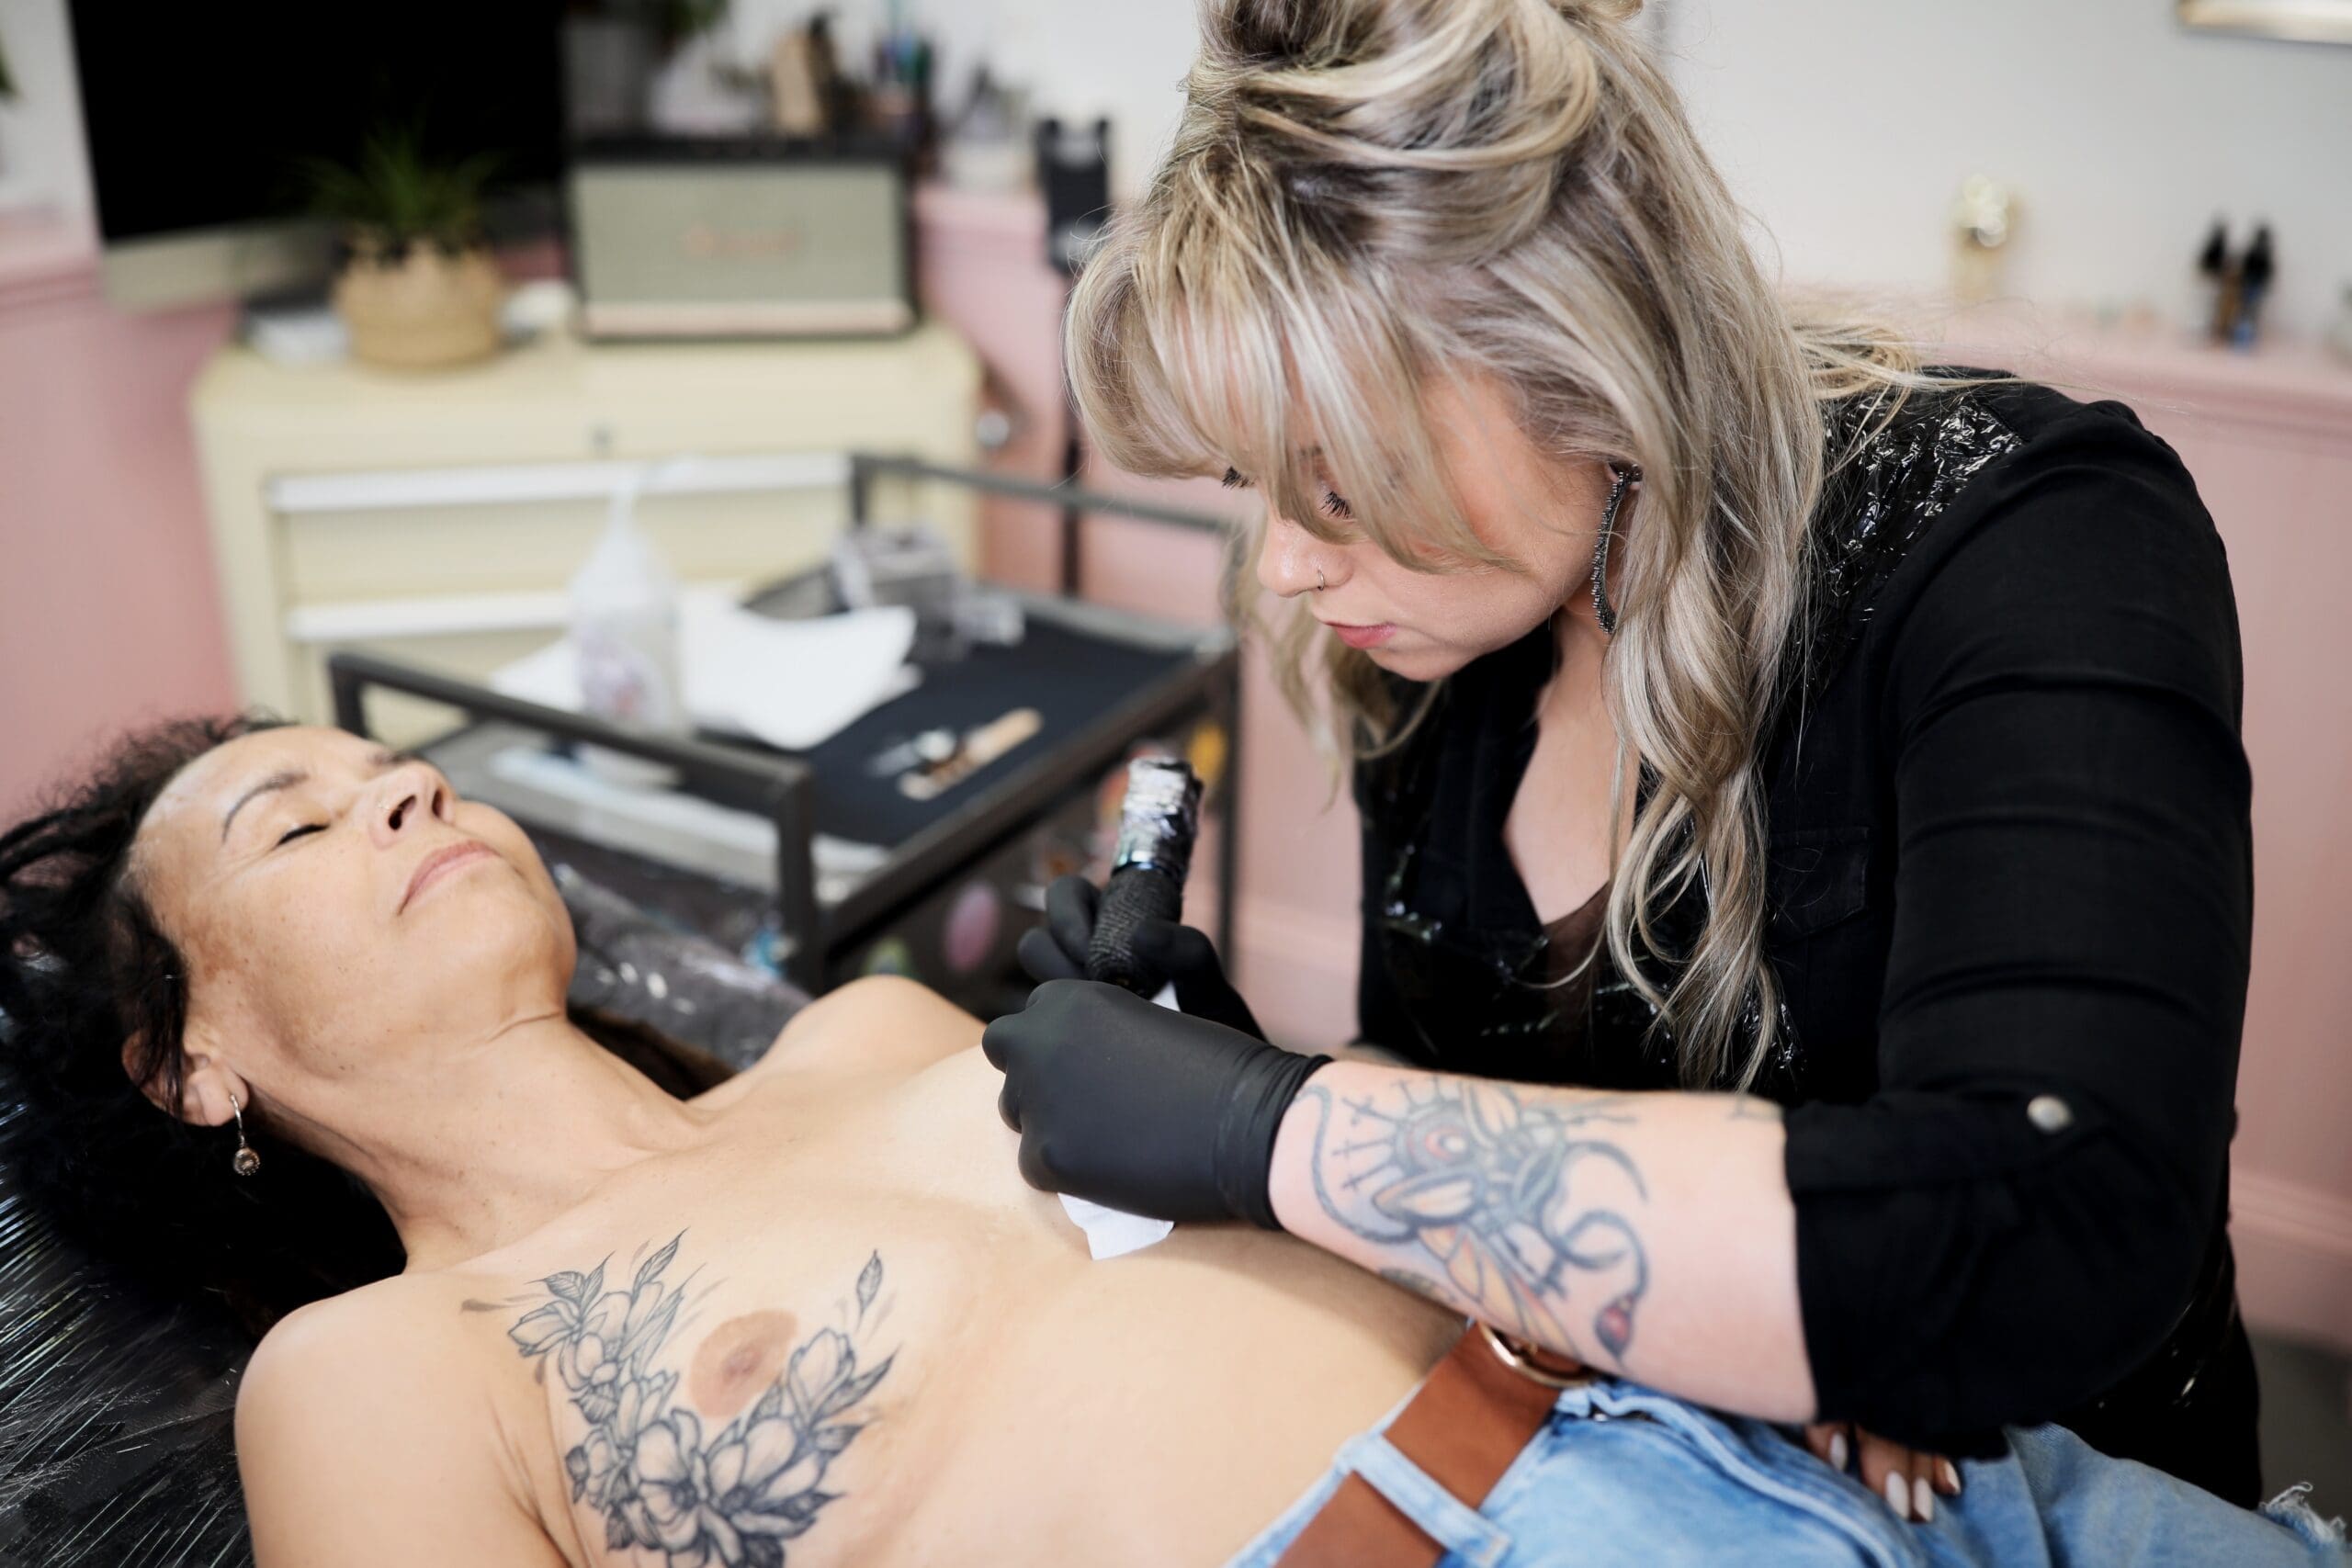 YOUR FREE GUIDE TO AREOLA TATTOOING